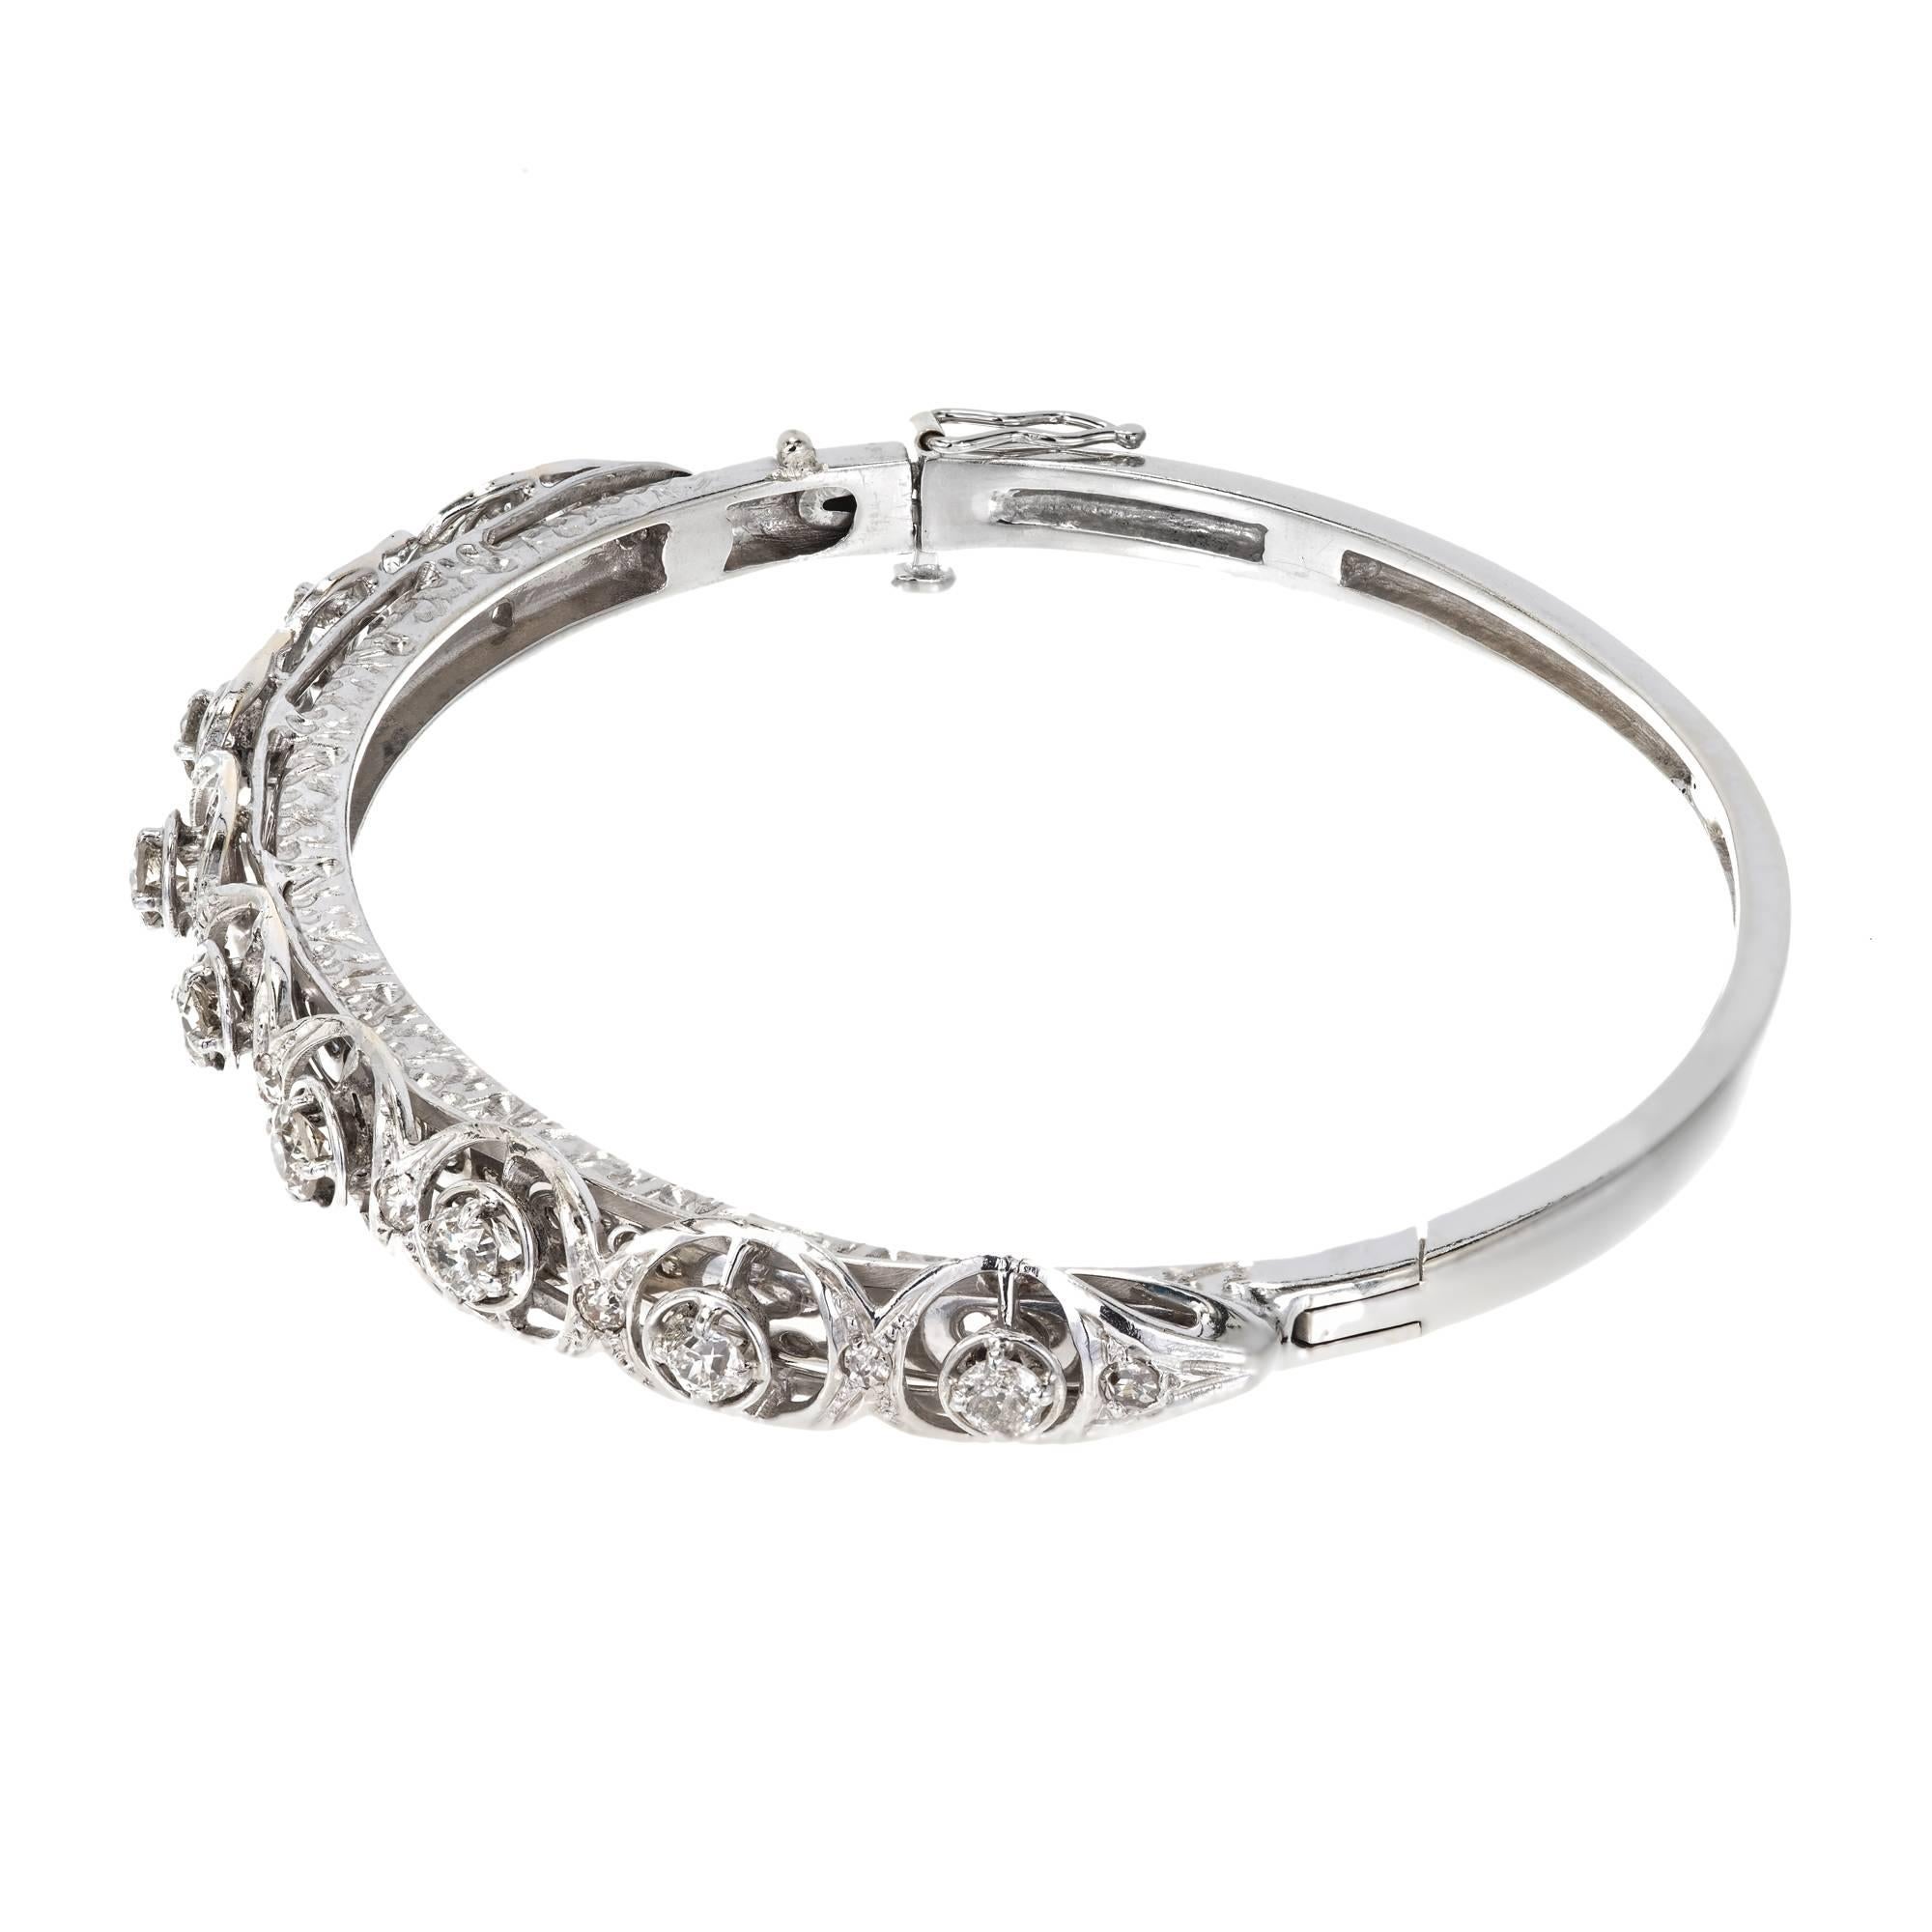 Solid 14k white gold bangle bracelet. The open work top is bead and prong set with old European cut diamonds that are bright and sparkly. The bracelet is solid with hinge catch and figure 8 safety working well. Circa 1940-1950.

9 old European cut